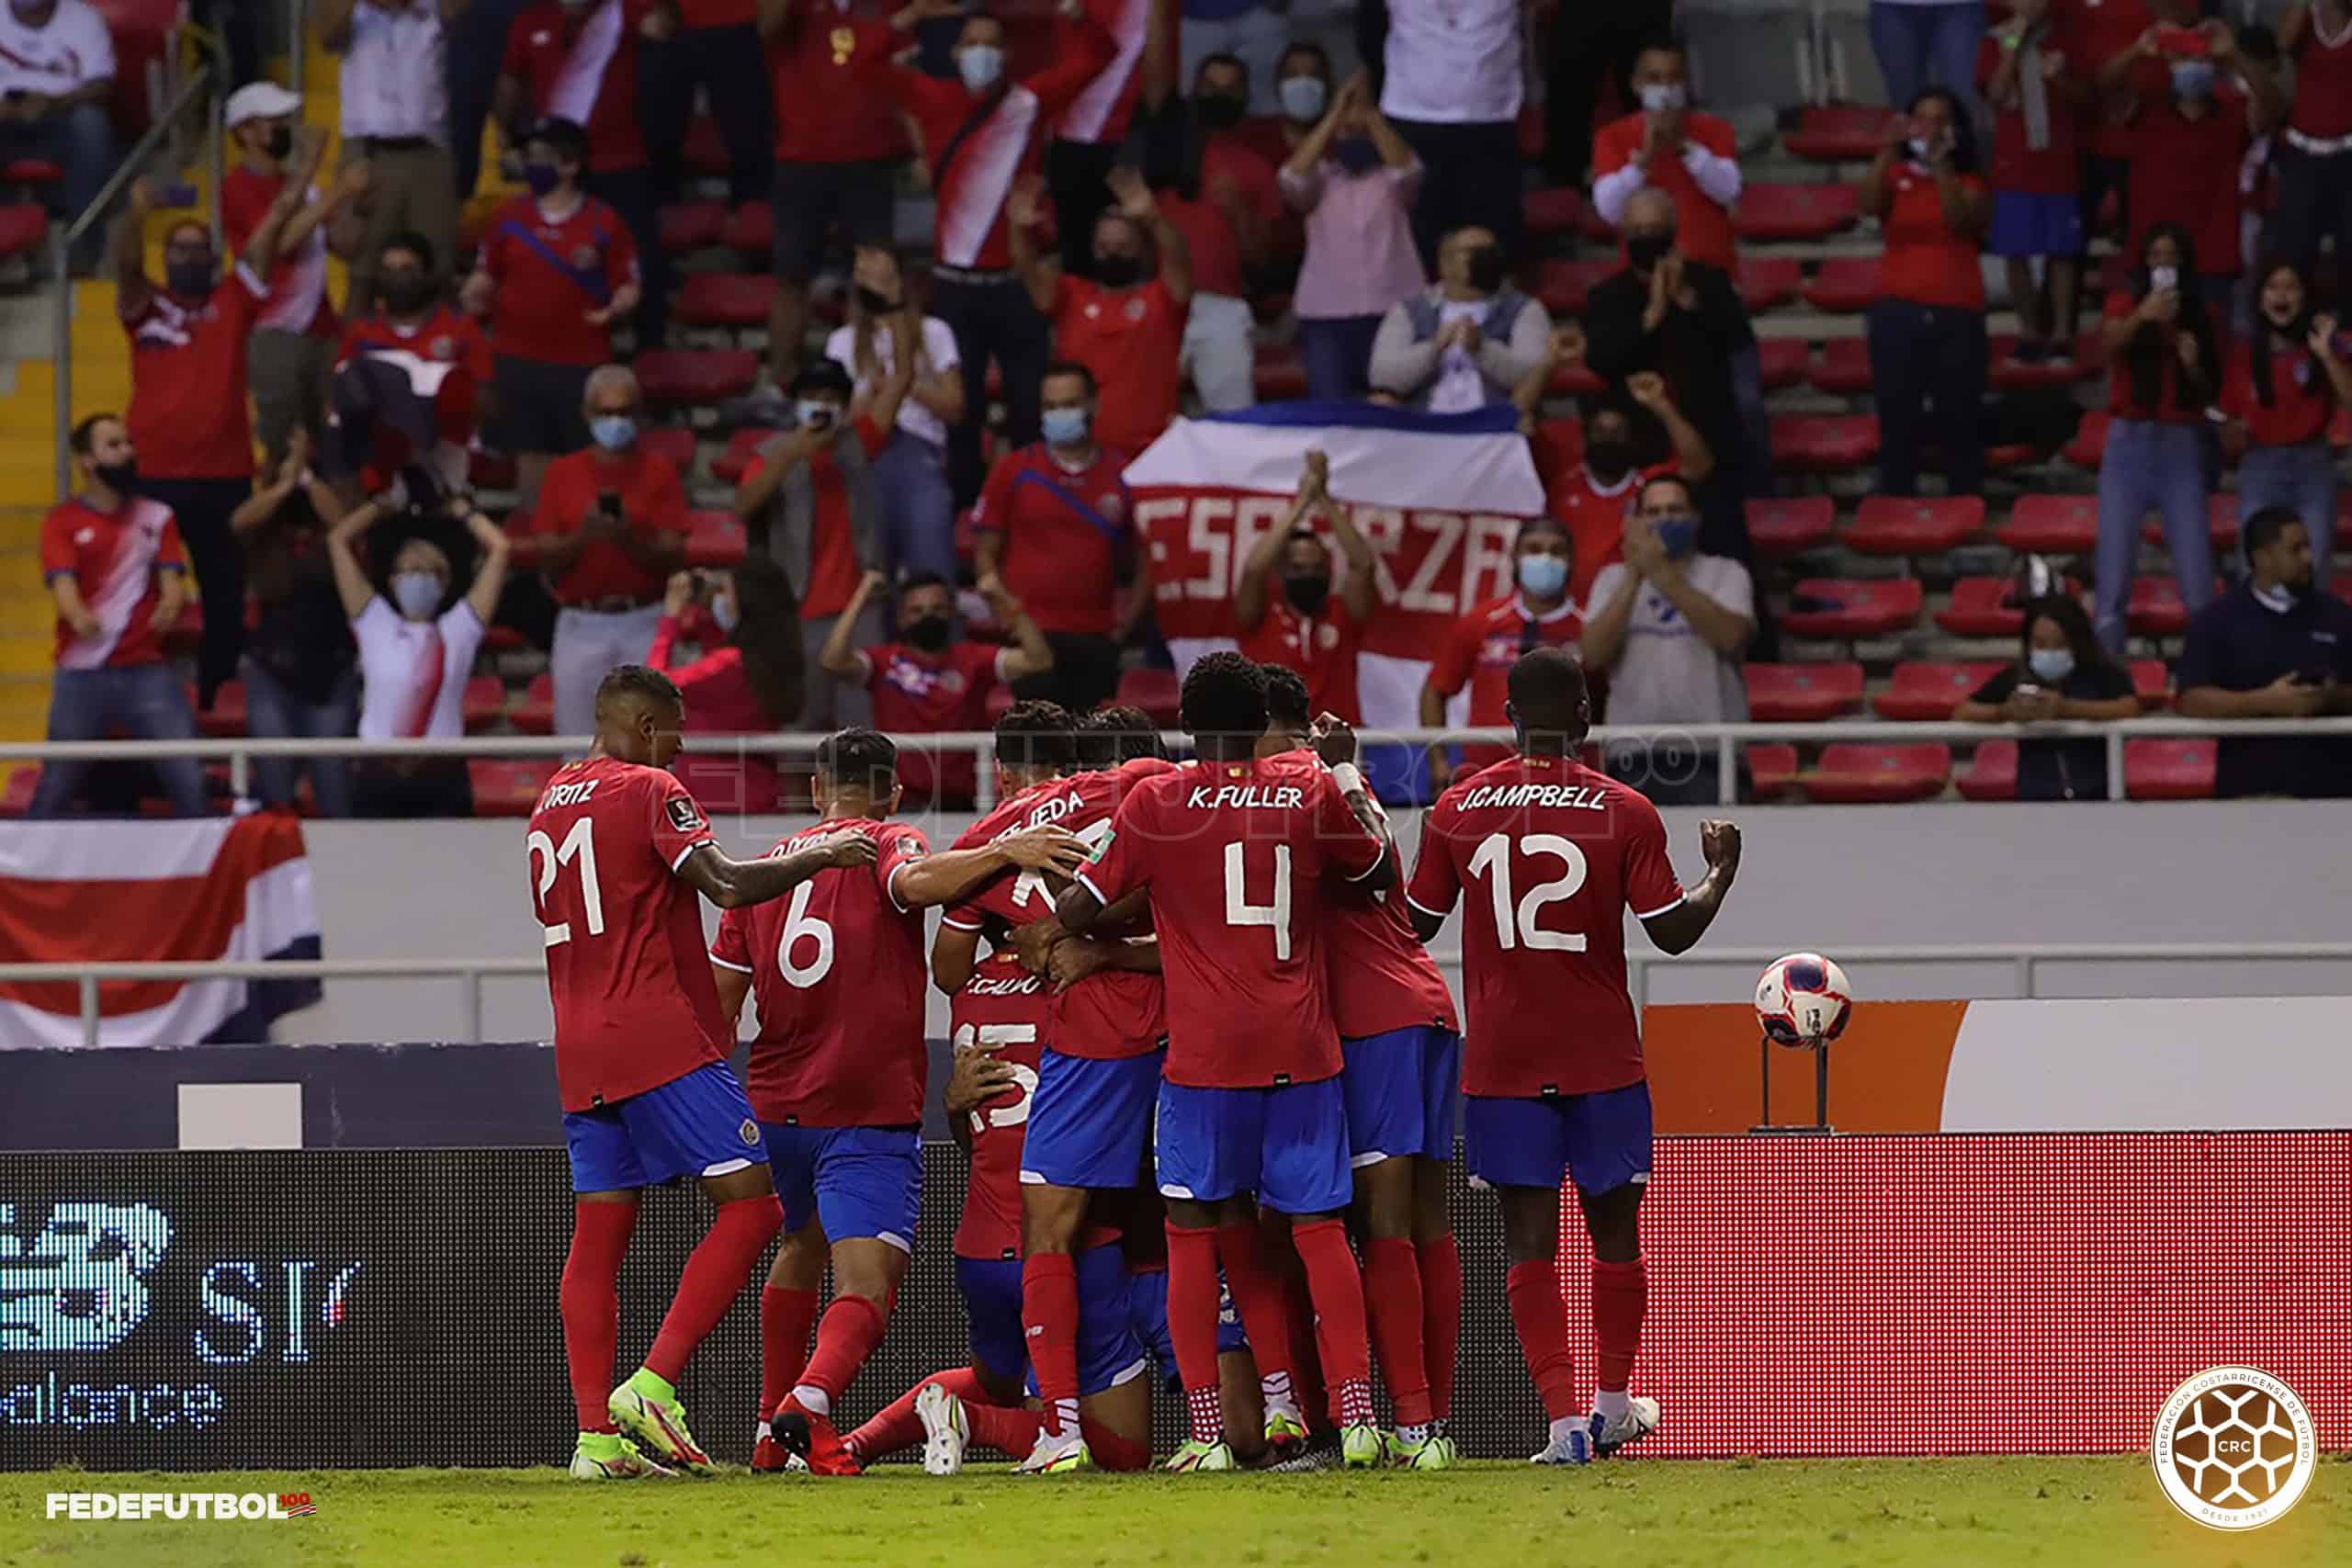 Costa Rica celebrates a goal against El Salvador in World Cup qualifying on October 10, 2021.